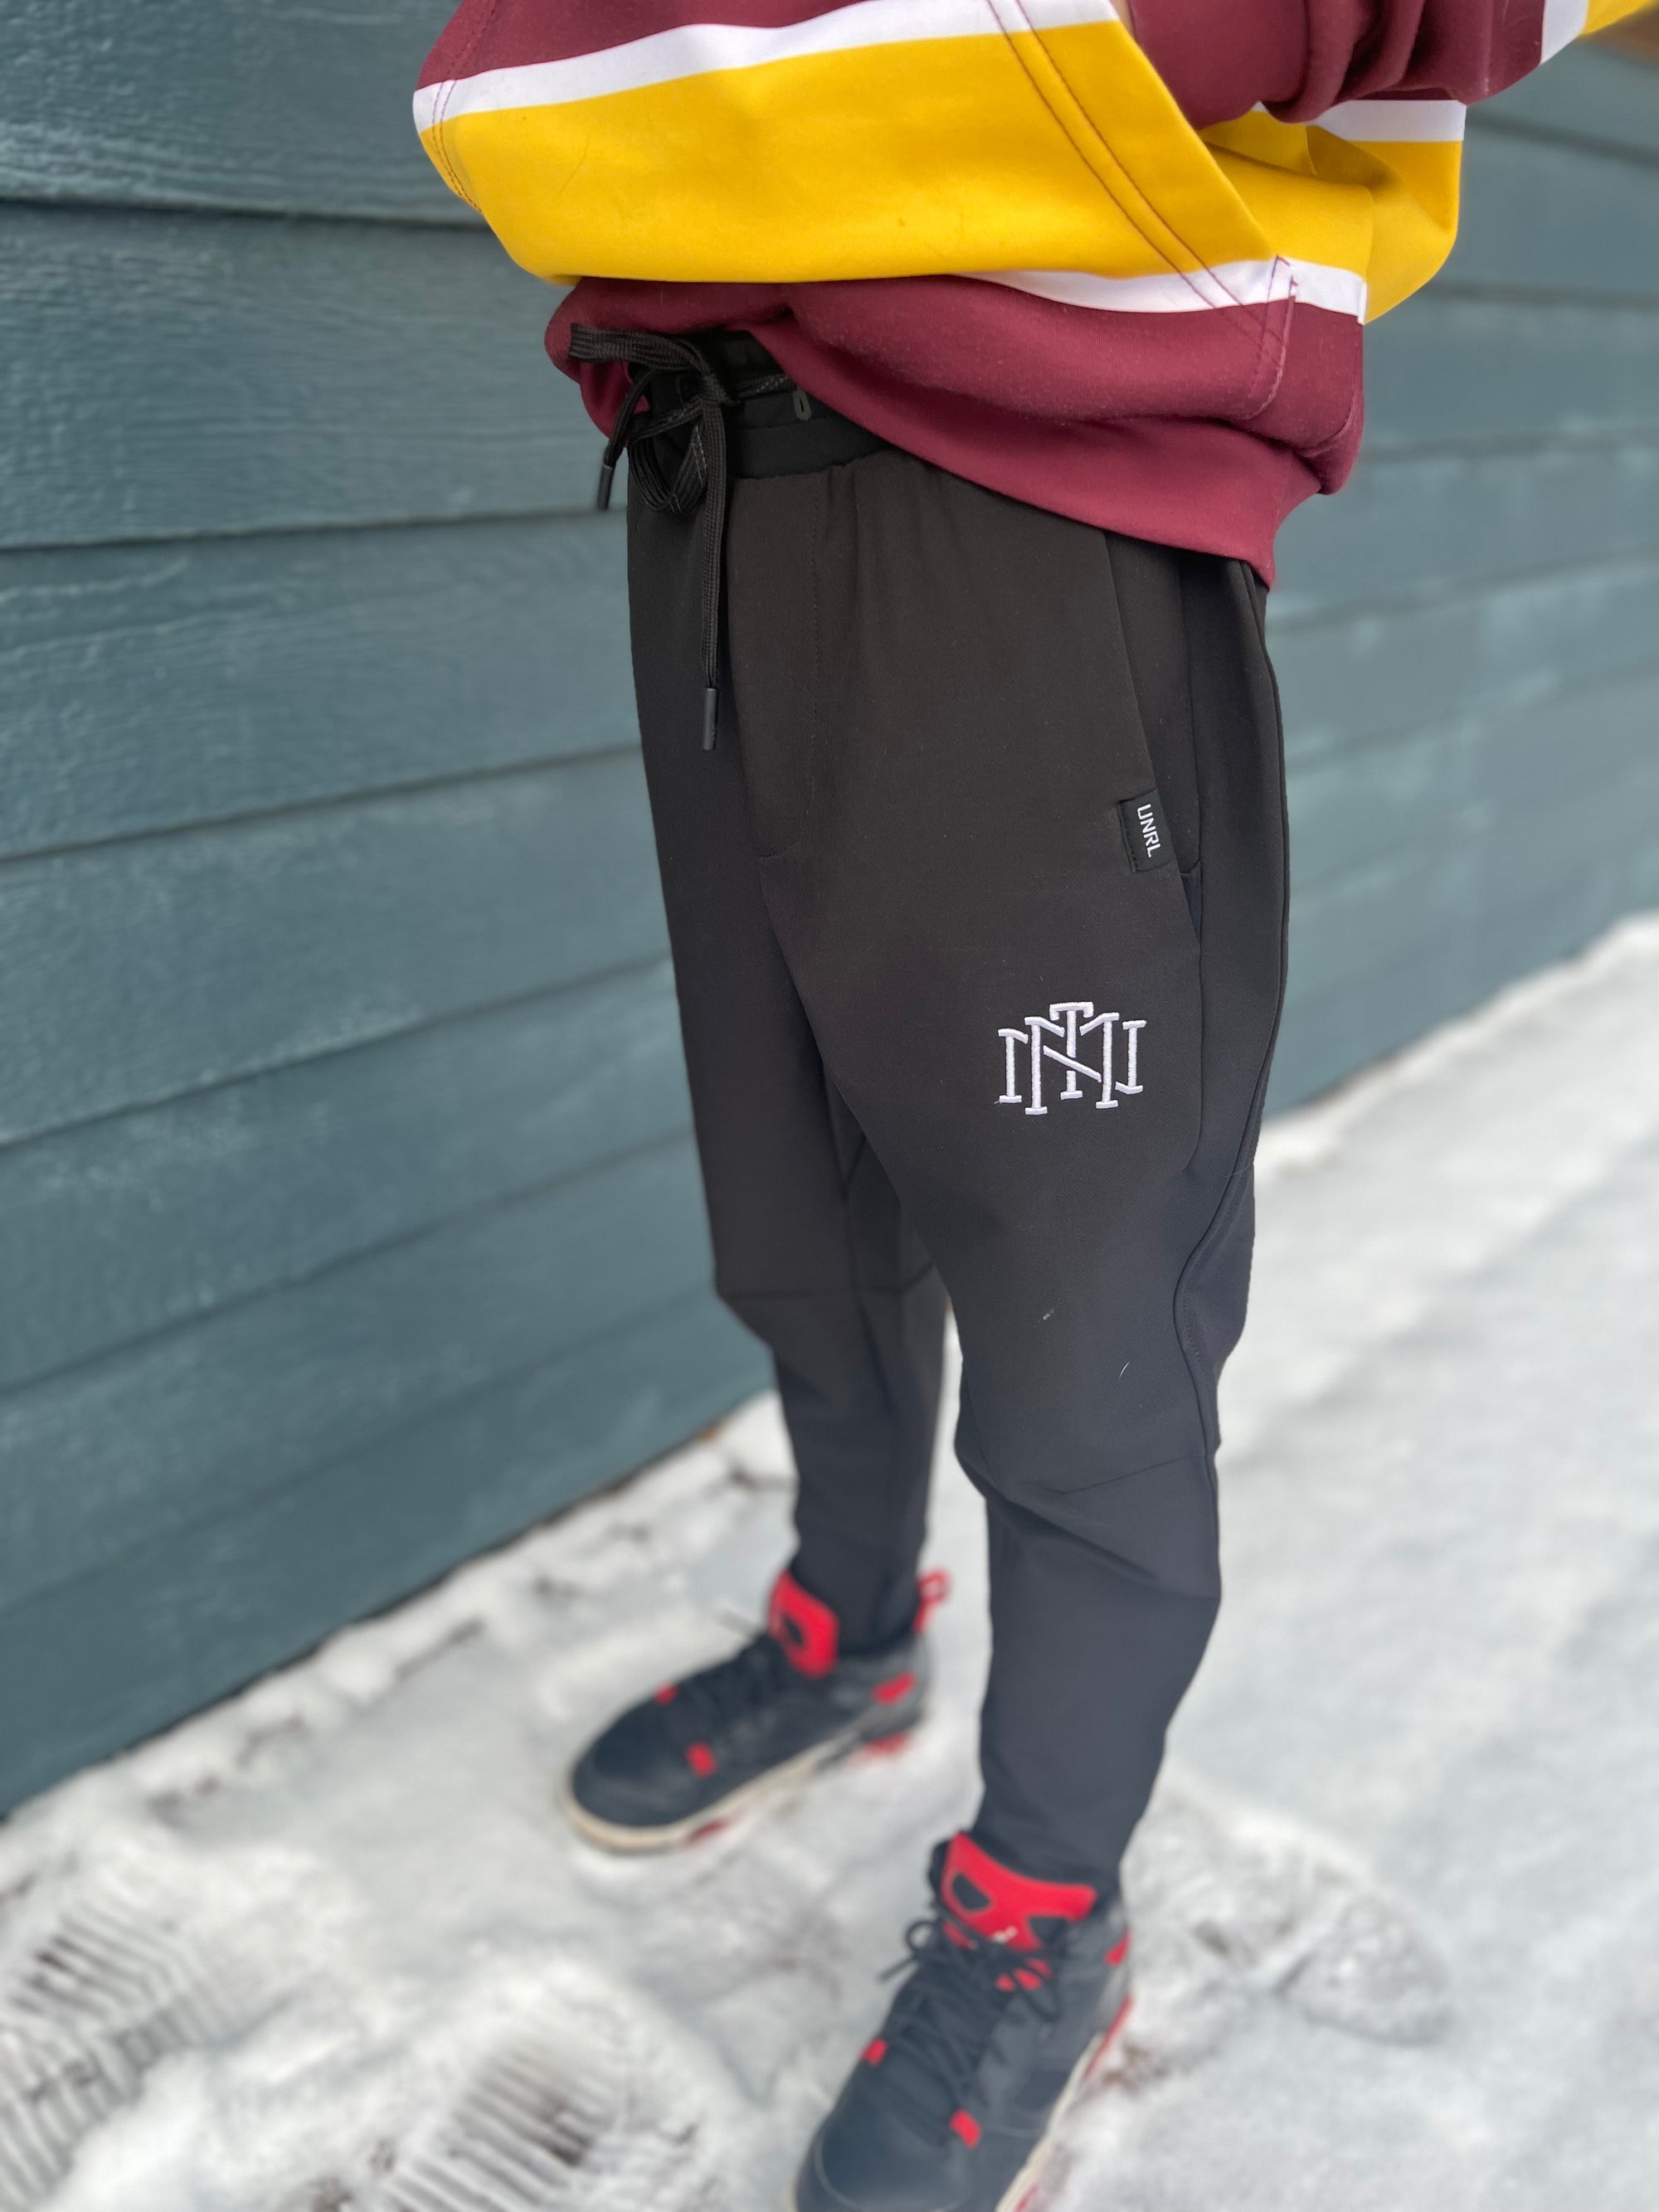 Apex Pant - Youth